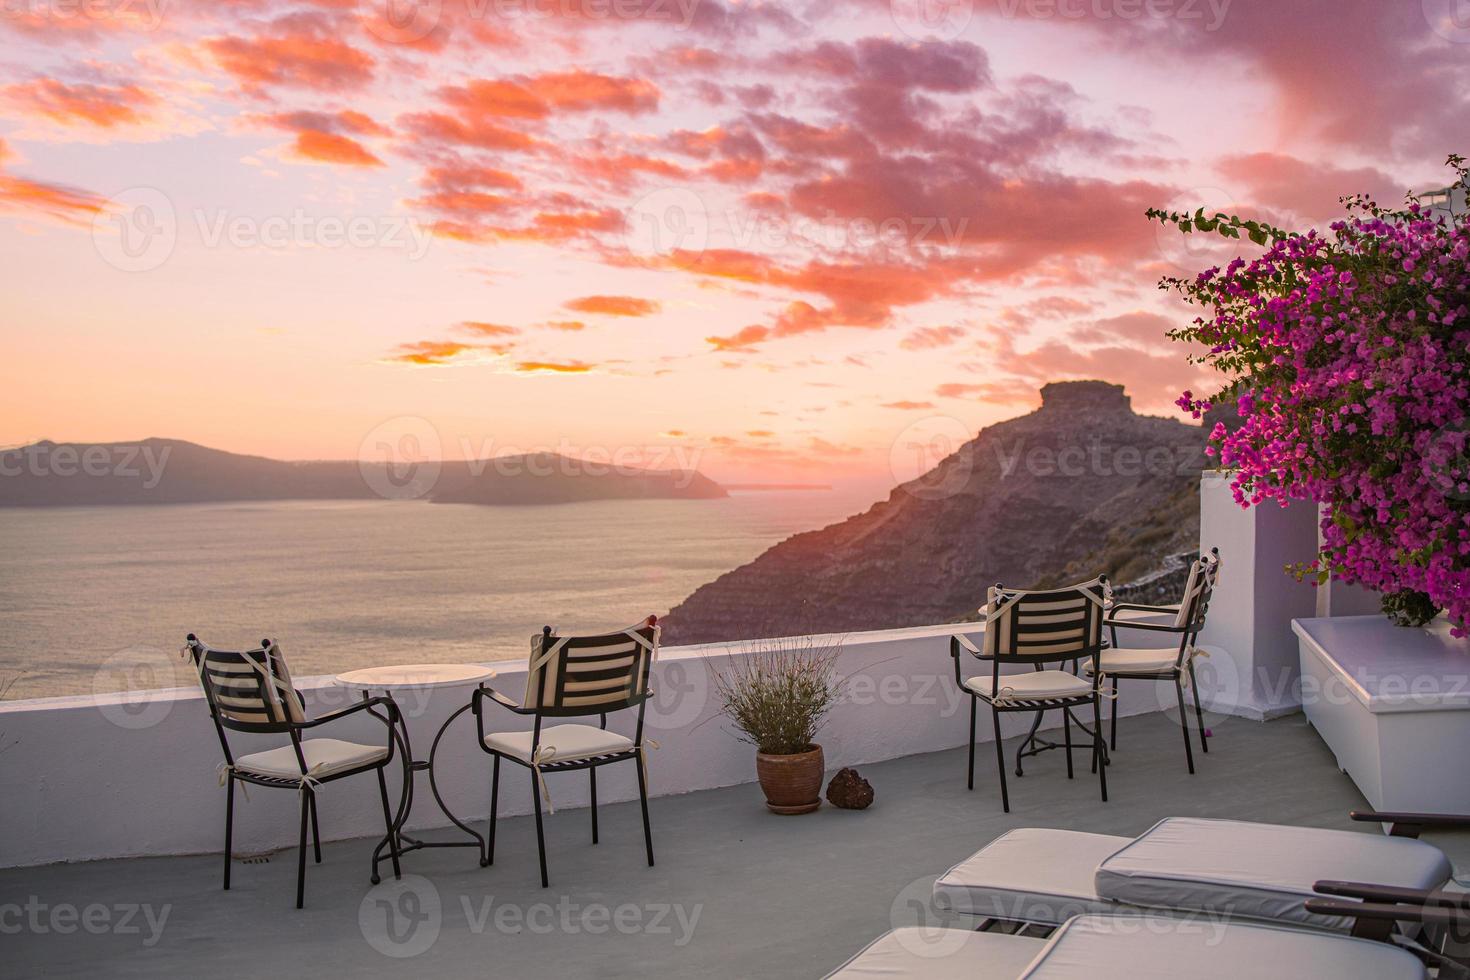 Beautiful view of Caldera and enjoying romantic scenery sunset Aegean sea, Santorini. Couple travel vacation, honeymoon destination. Romance with flowers, two chairs table and sea view. Luxury holiday photo